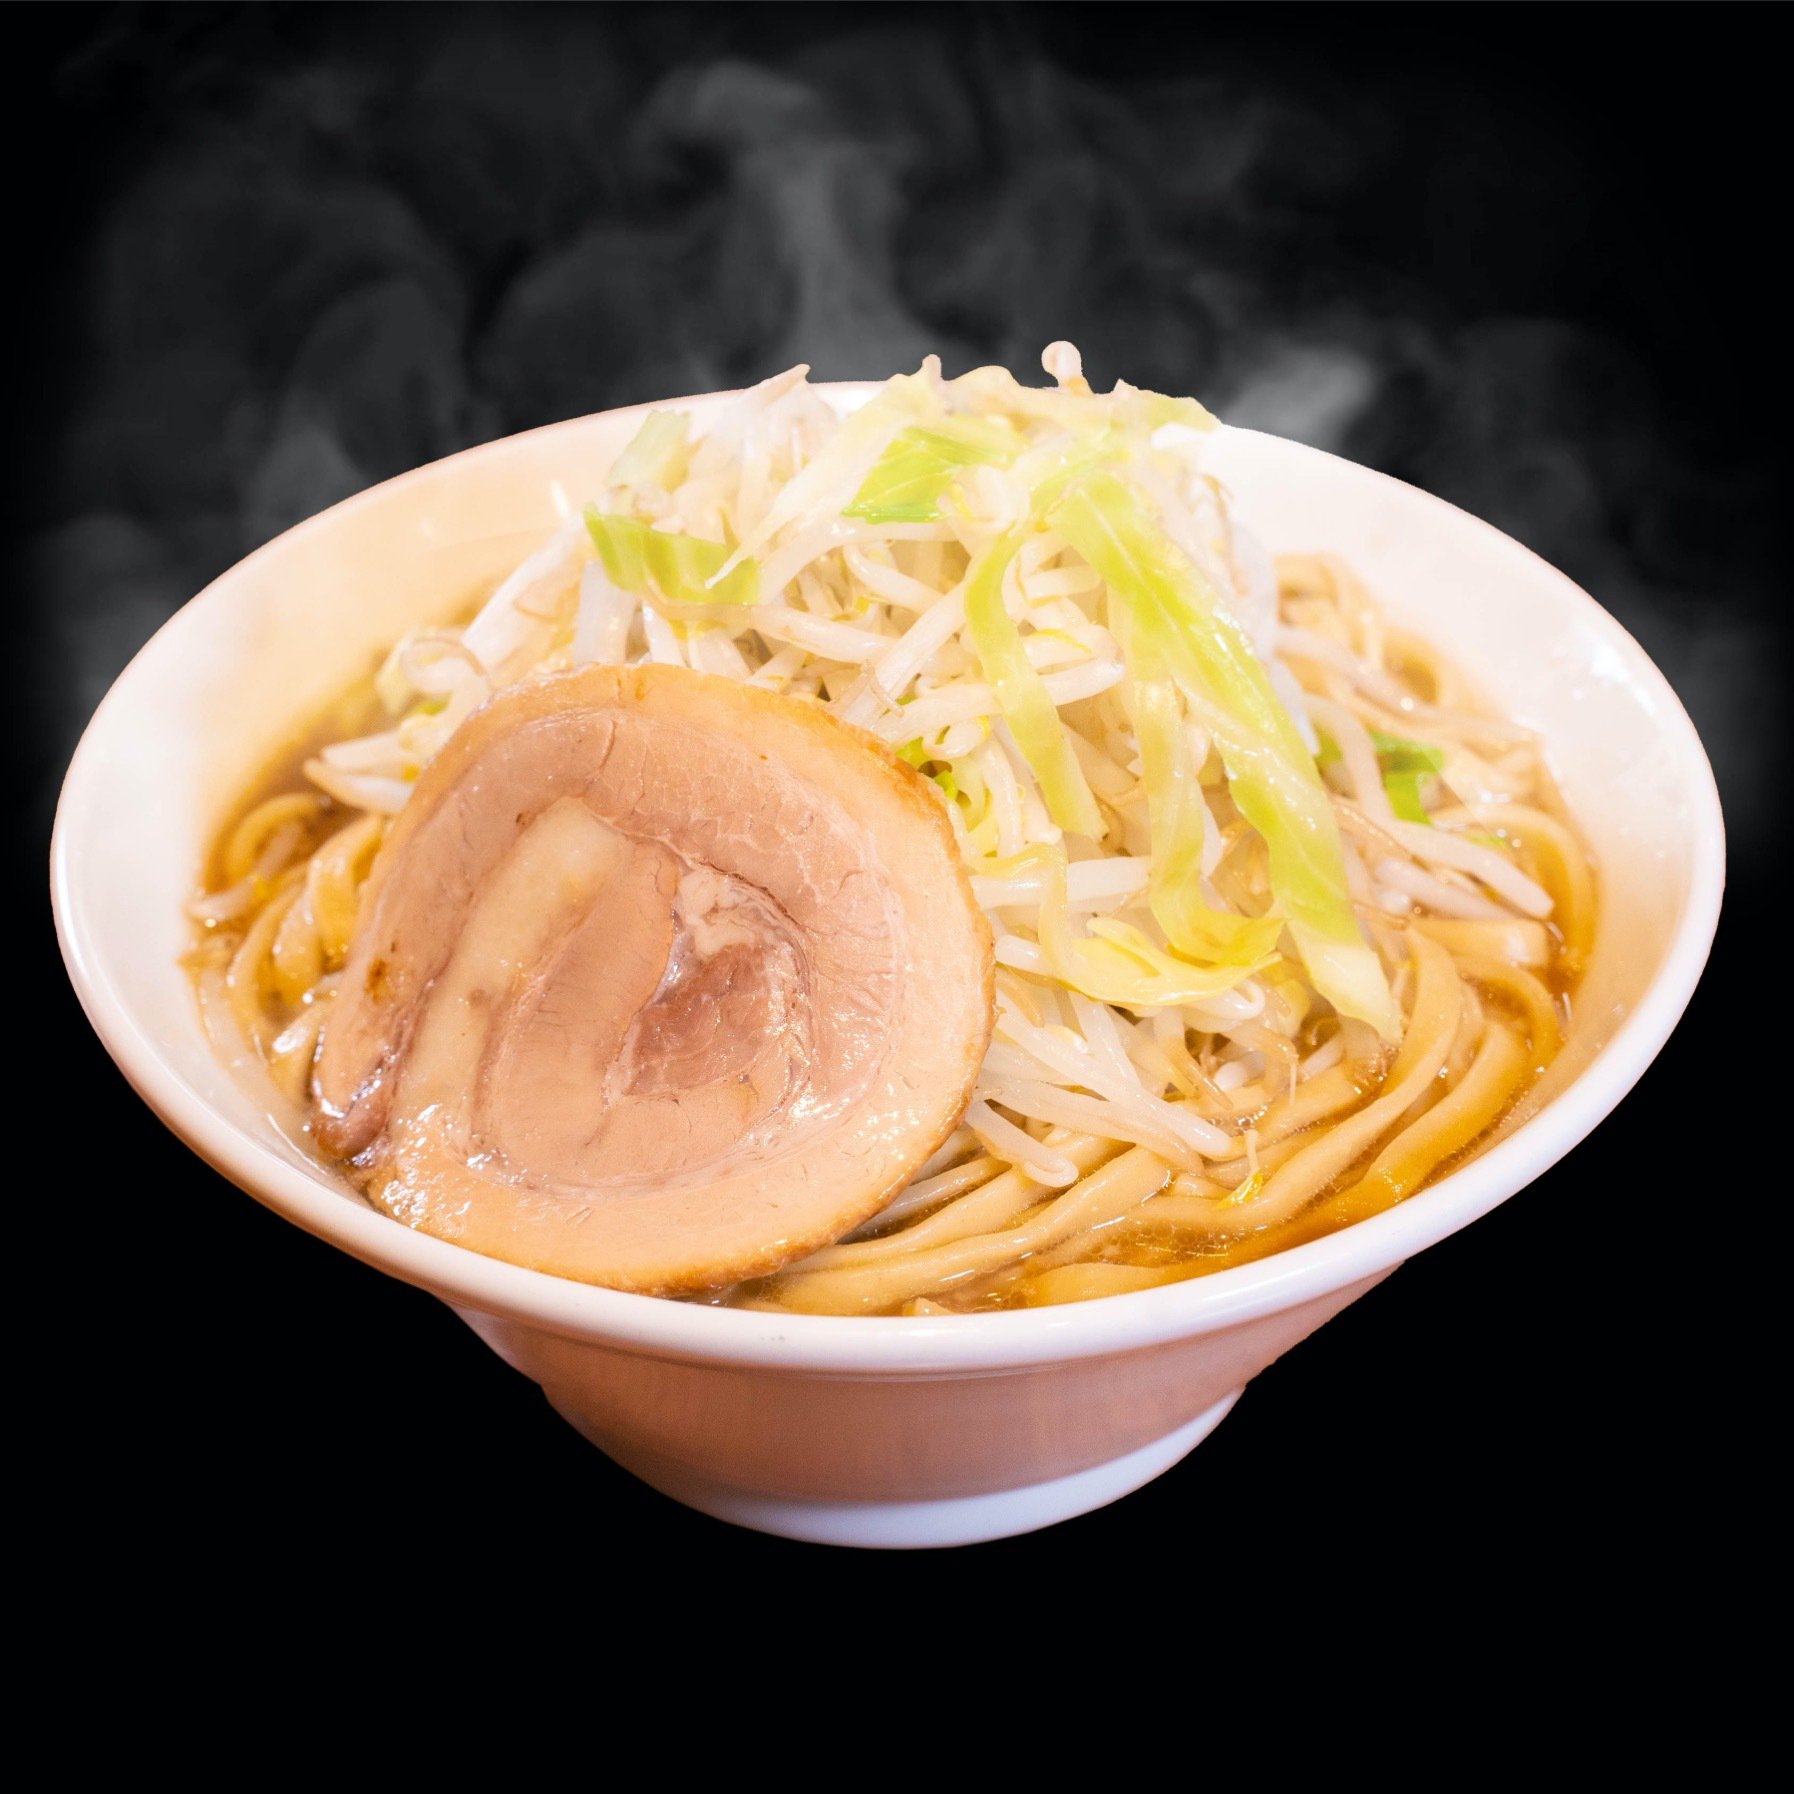 <img class='new_mark_img1' src='https://img.shop-pro.jp/img/new/icons14.gif' style='border:none;display:inline;margin:0px;padding:0px;width:auto;' />豚ラーメン　２食（冷凍）の商品画像